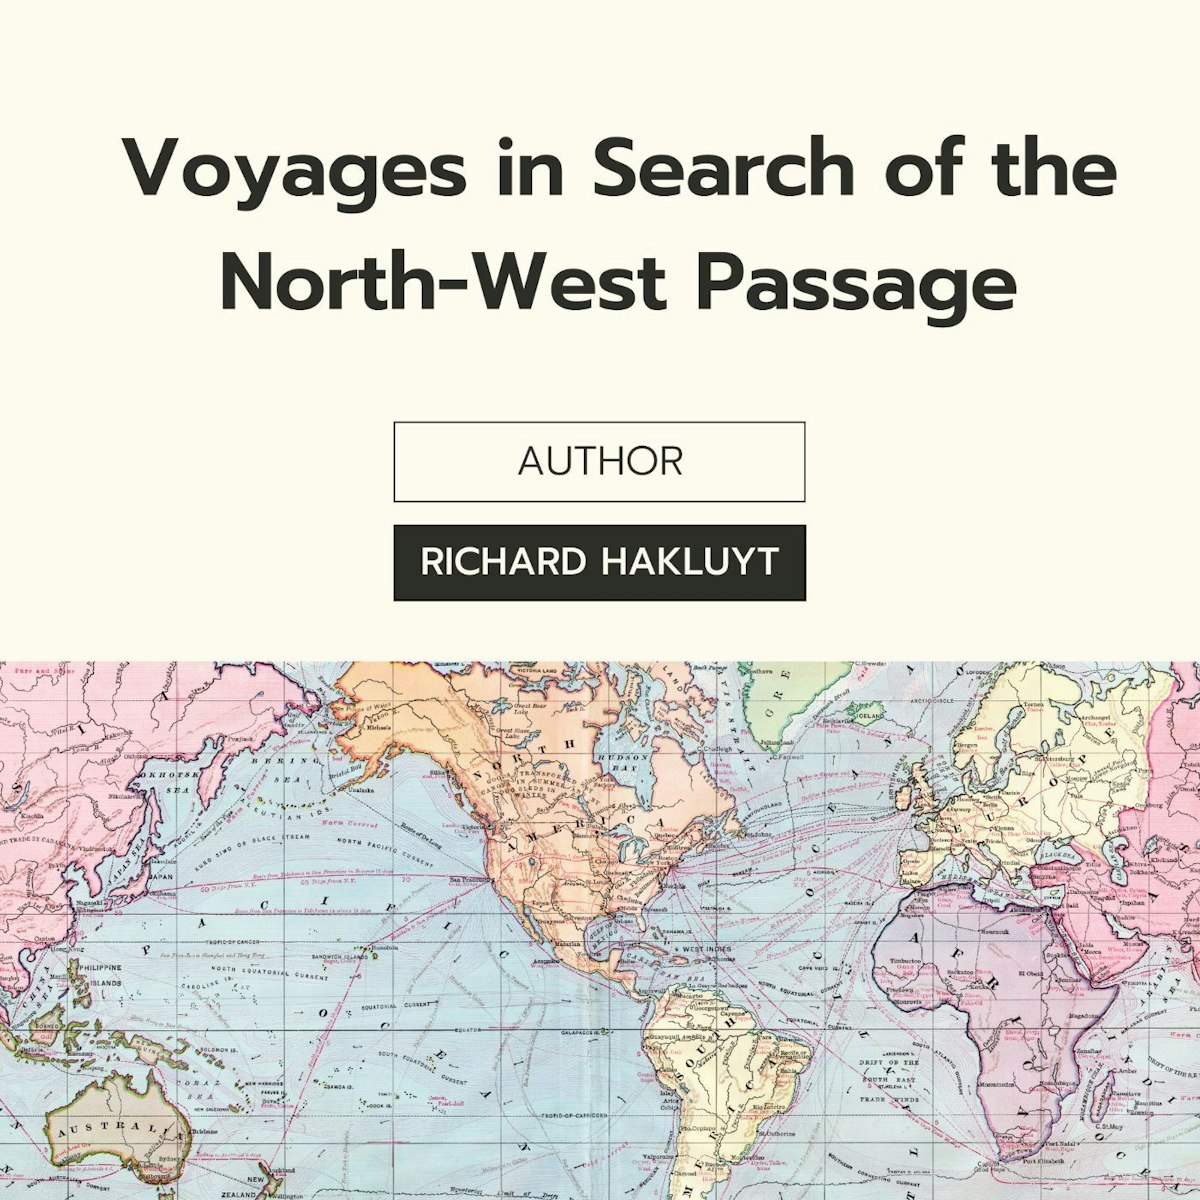 featured image - TO PROVE BY EXPERIENCE OF SUNDRY MEN’S TRAVELS THE OPENING OF SOME PART OF THIS NORTH-WEST PASSAGE